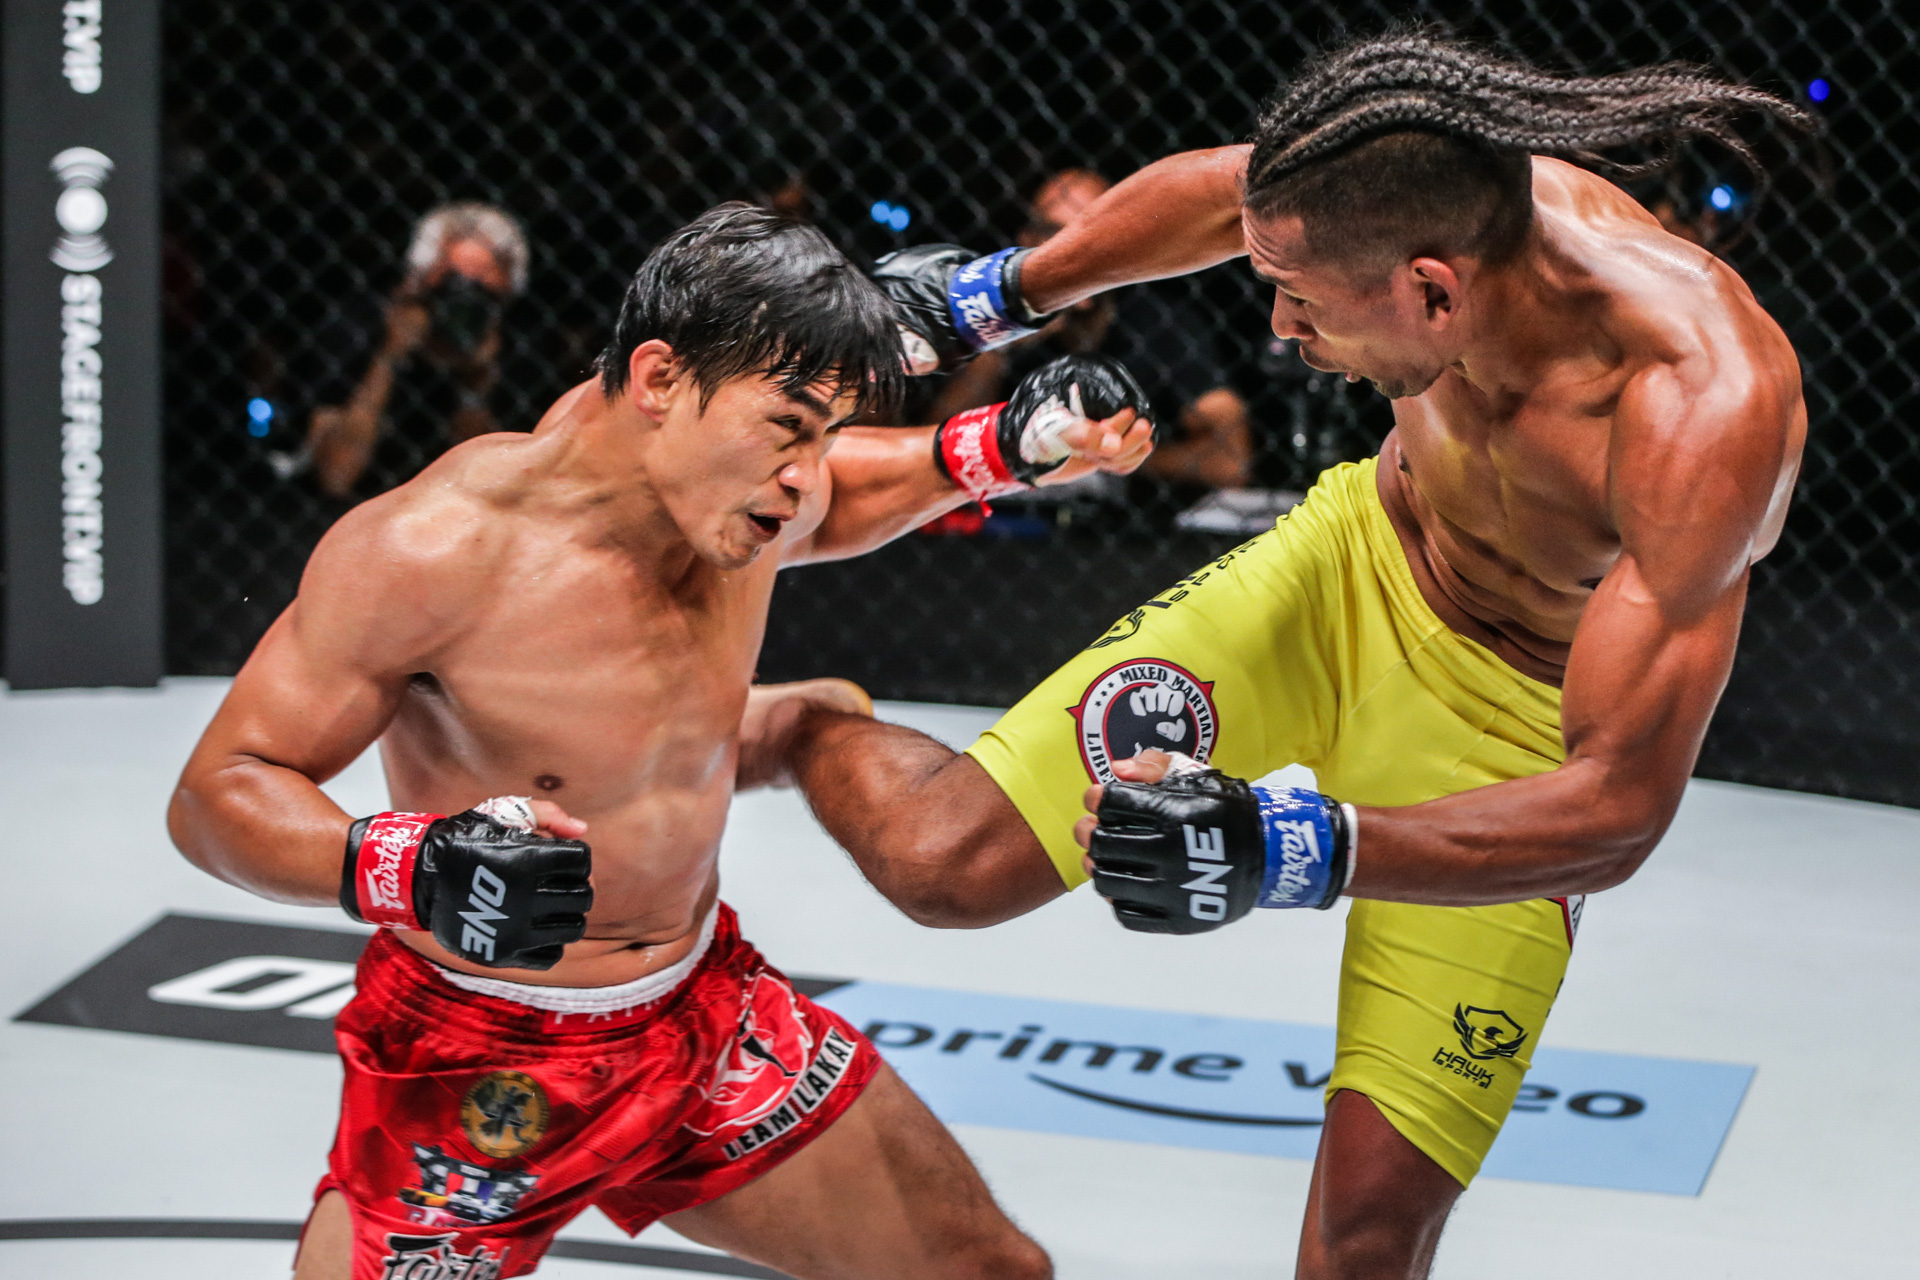 Folayang absorbs another setback, bows to Brazilian foe